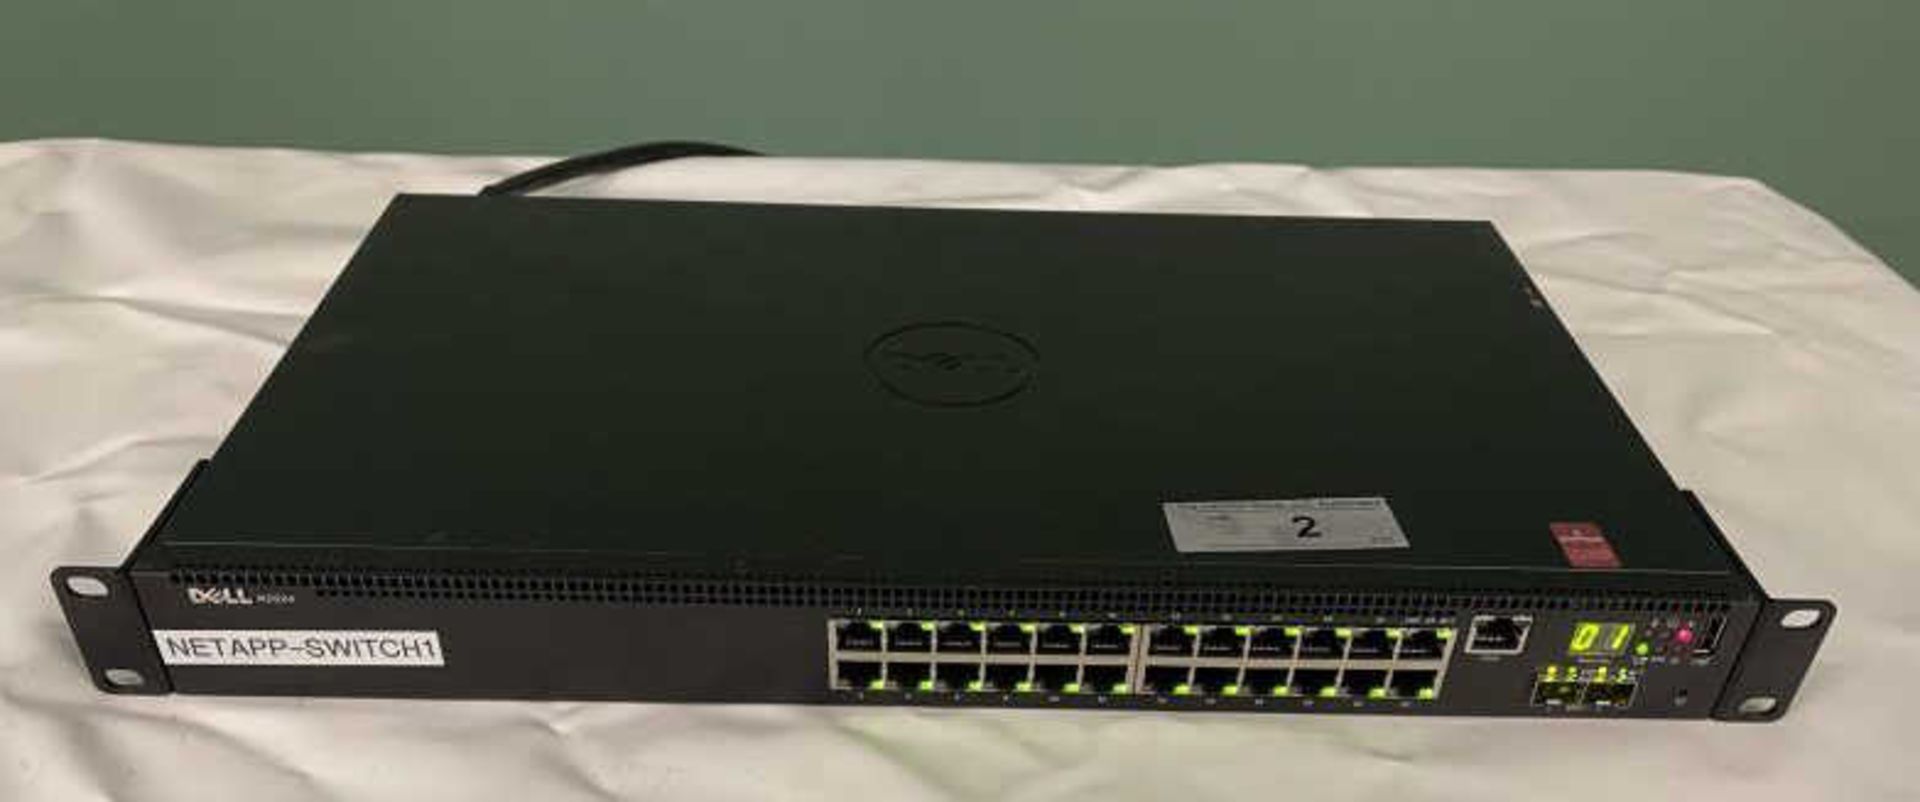 Dell M: E04W 2024 Network Switch, Powers Up, No Further Testing Done